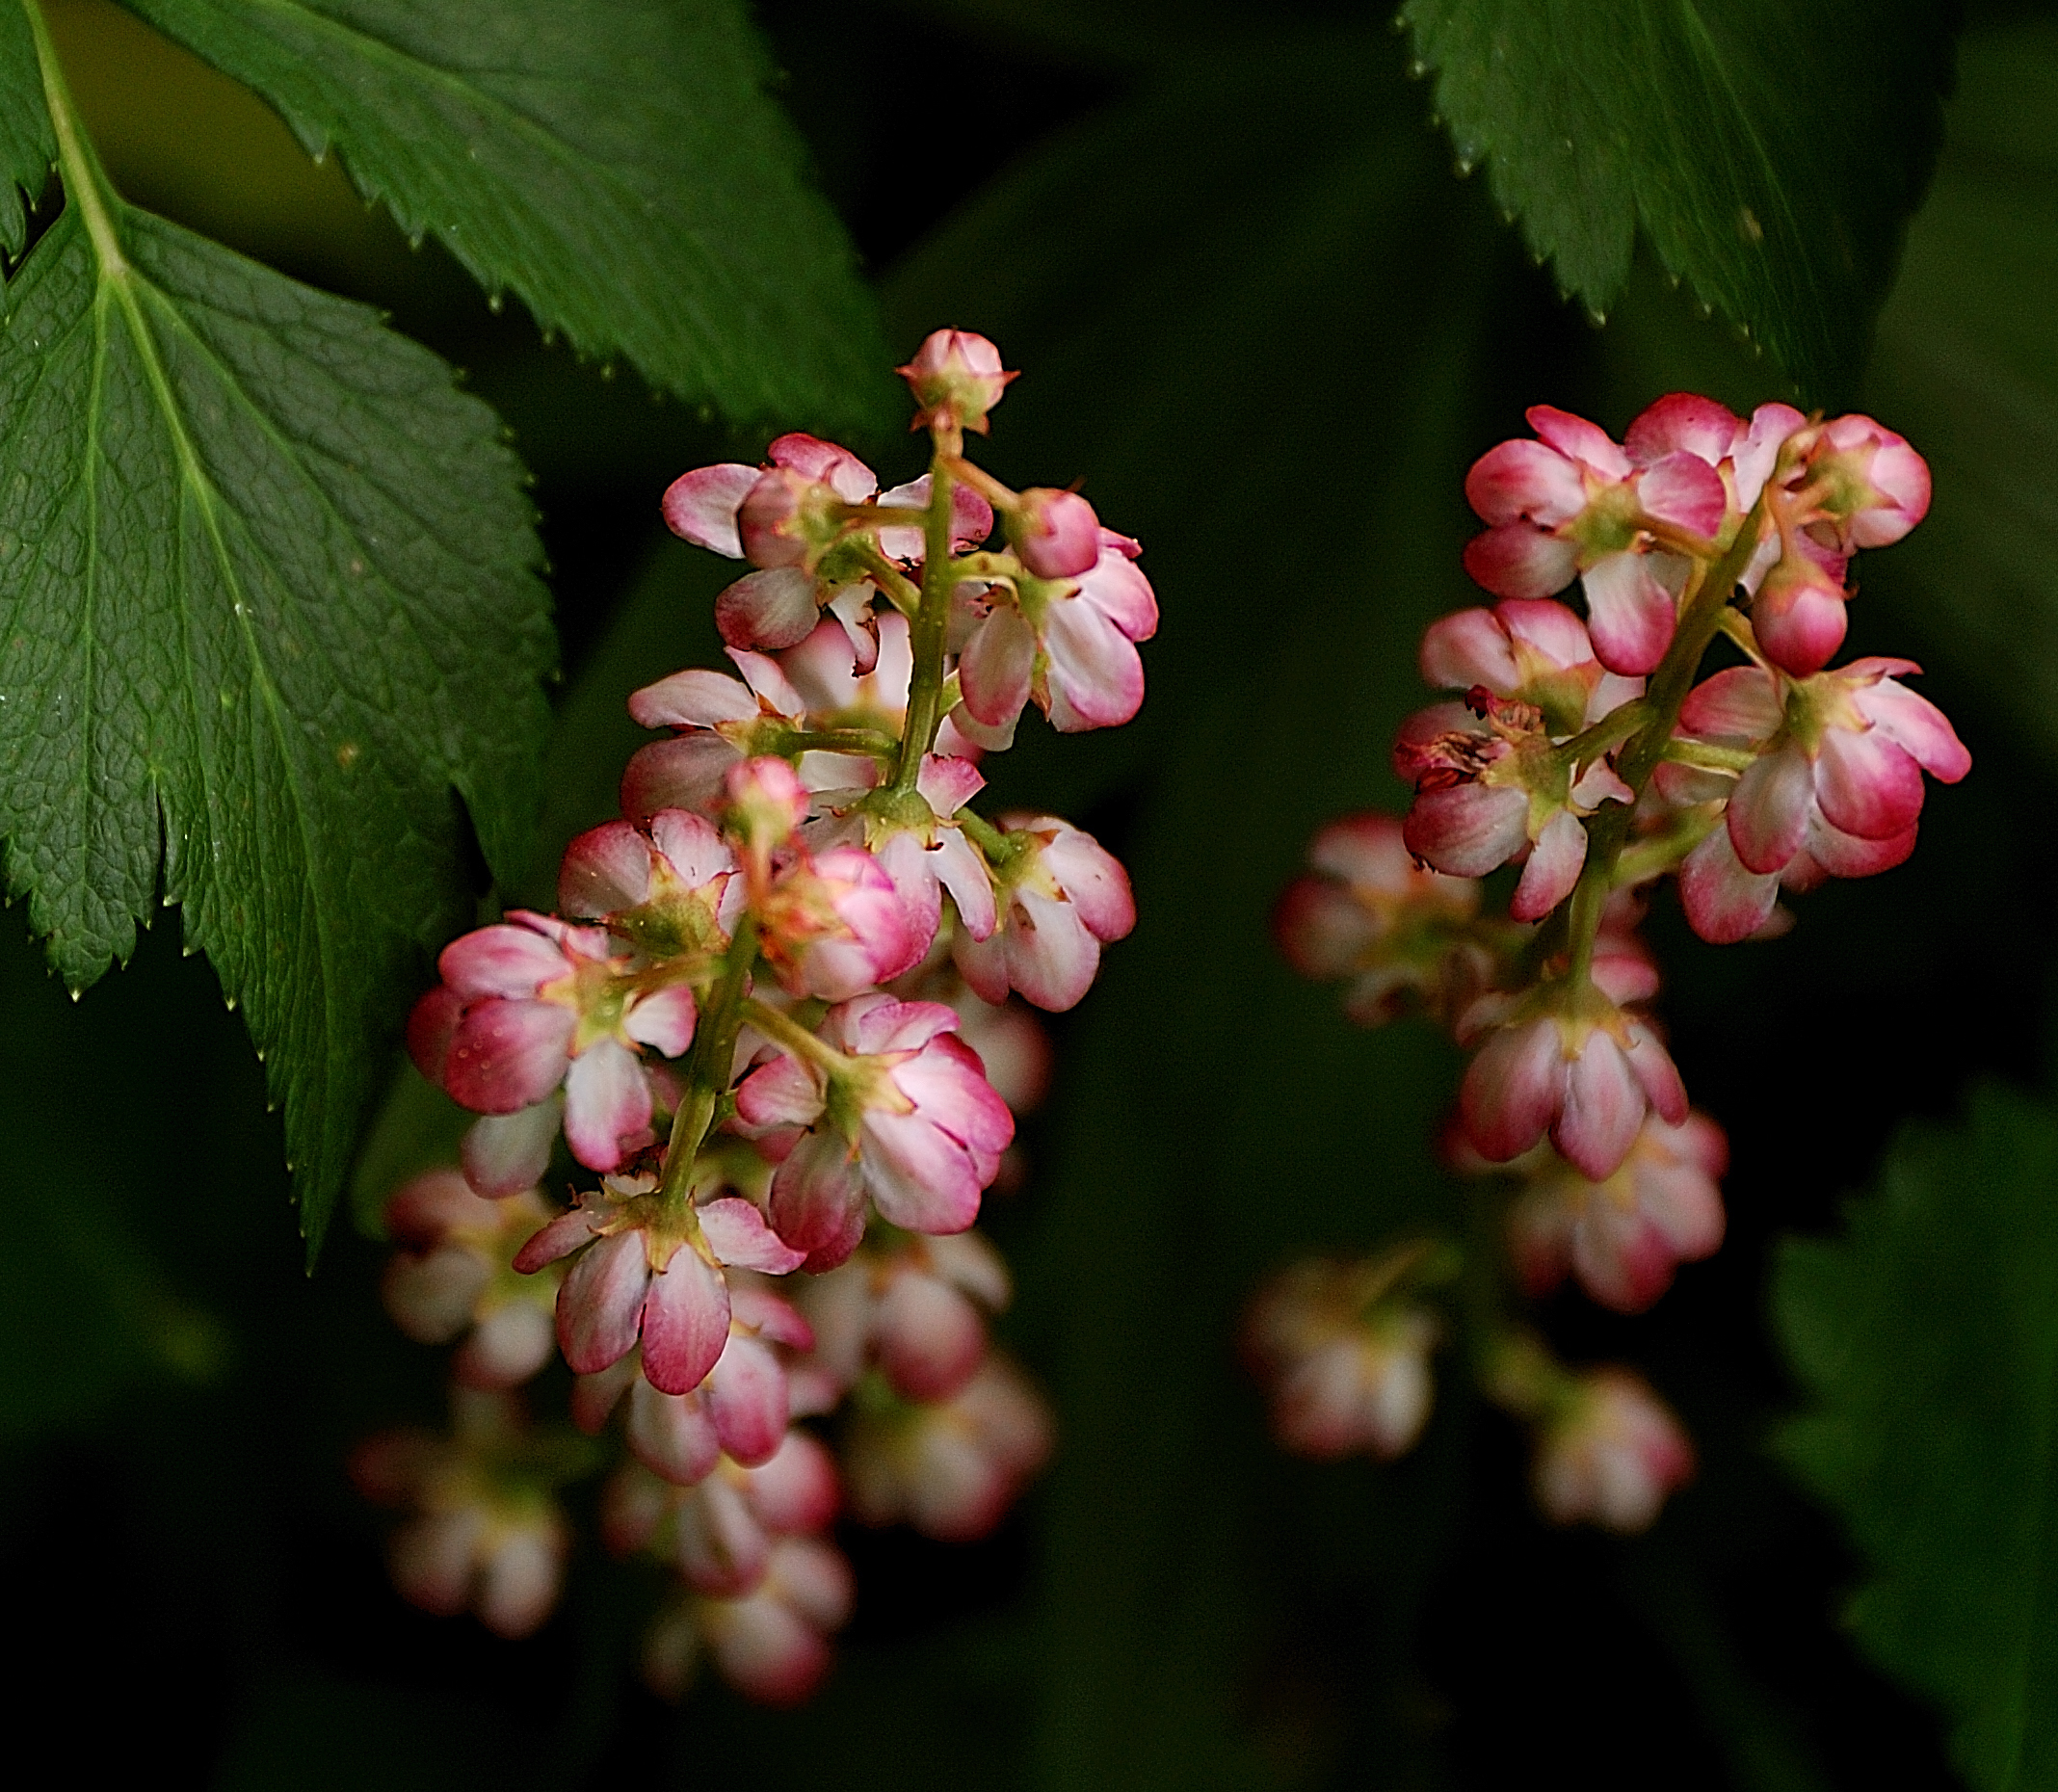 Two stalks with blooming pink and white flowers stand between dark green leaves.